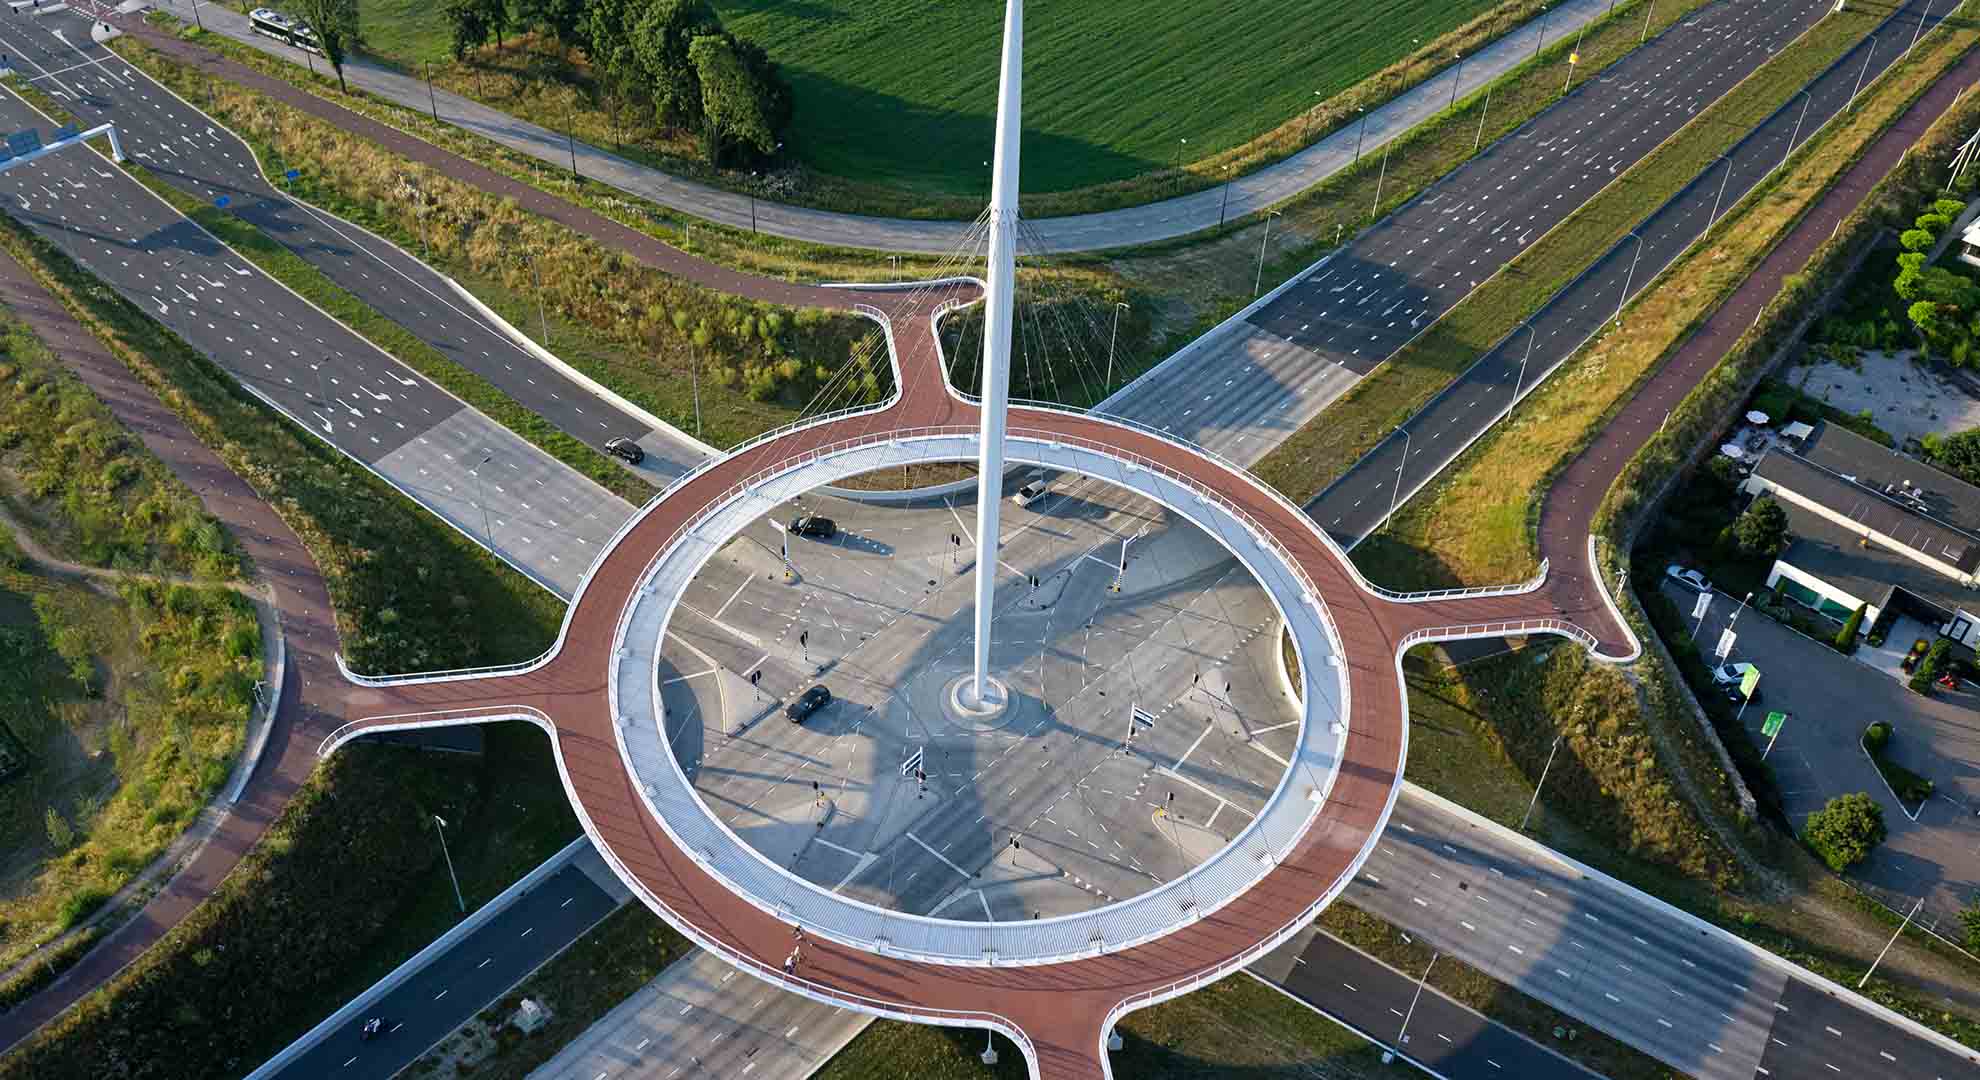 The Hovenring Suspended bicycle roundabout, by ipv Delft Design Agency. Image by Delft Henk Snaterse